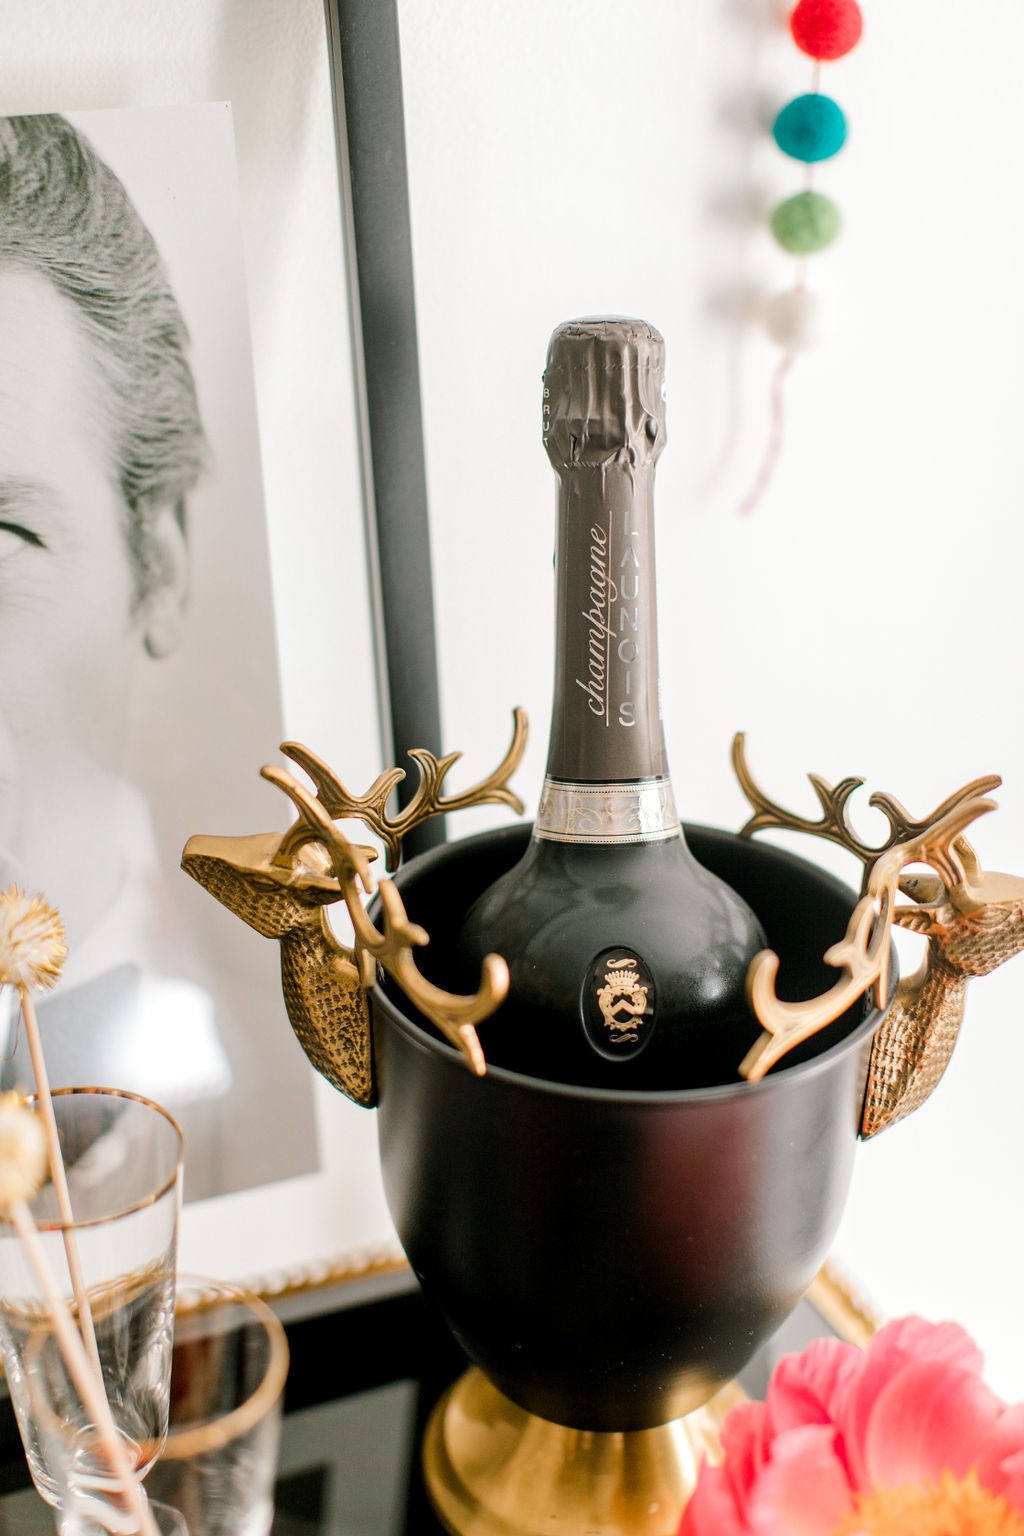 How to style a holiday bar cart